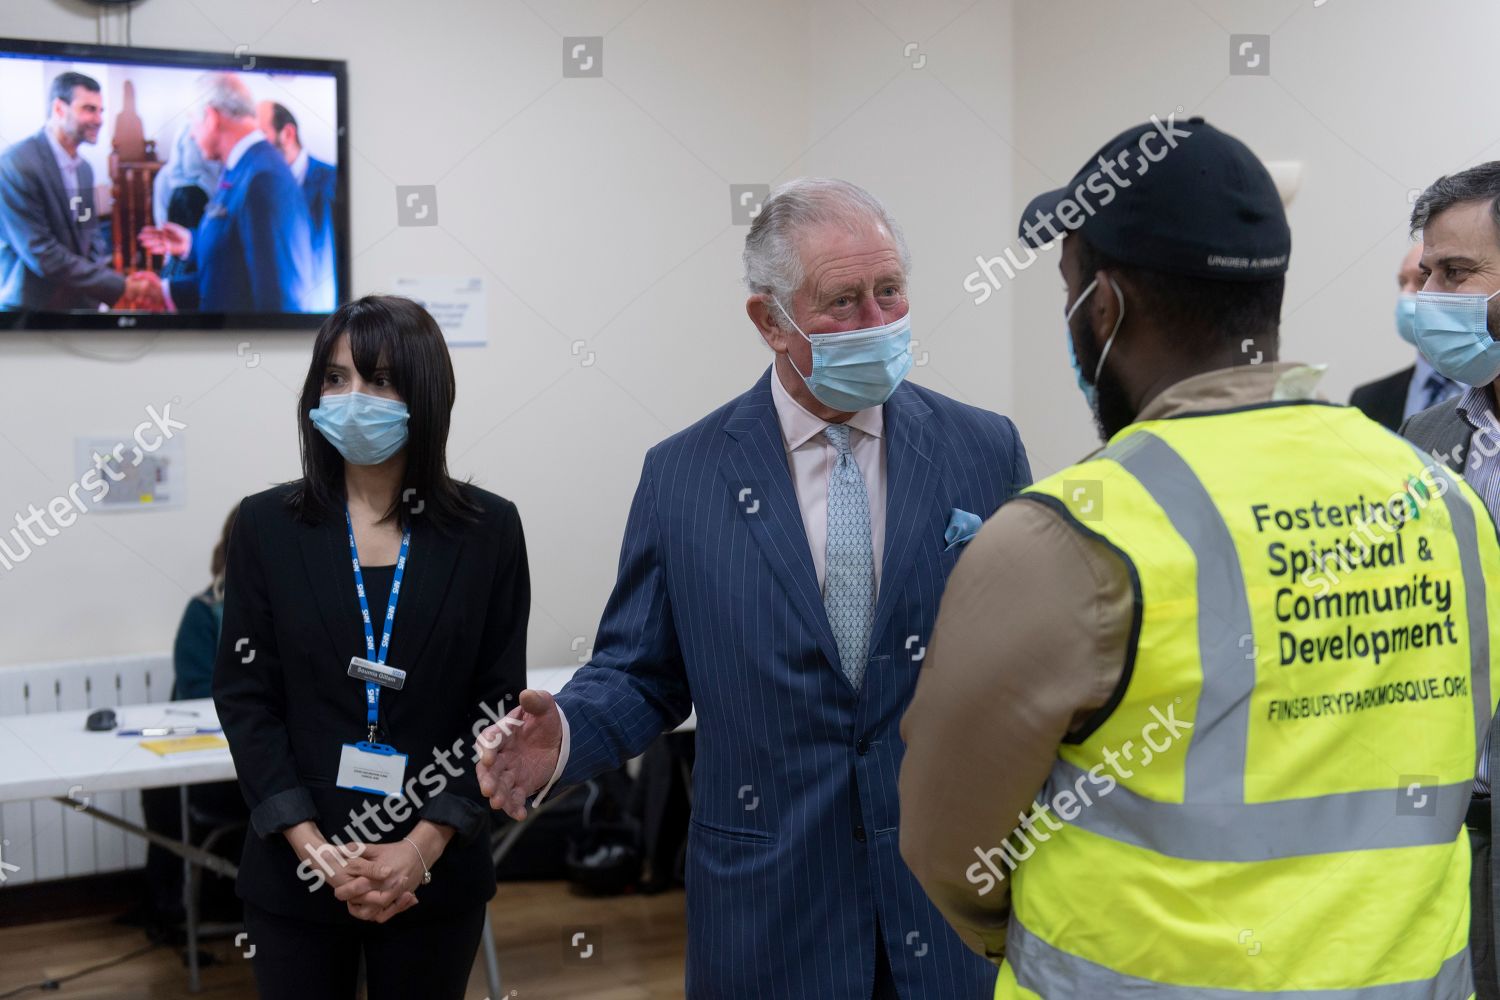 prince-charles-and-camilla-duchess-of-cornwall-visit-vaccination-pop-up-centre-at-finsbury-park-mosque-london-uk-shutterstock-editorial-11802378l.jpg